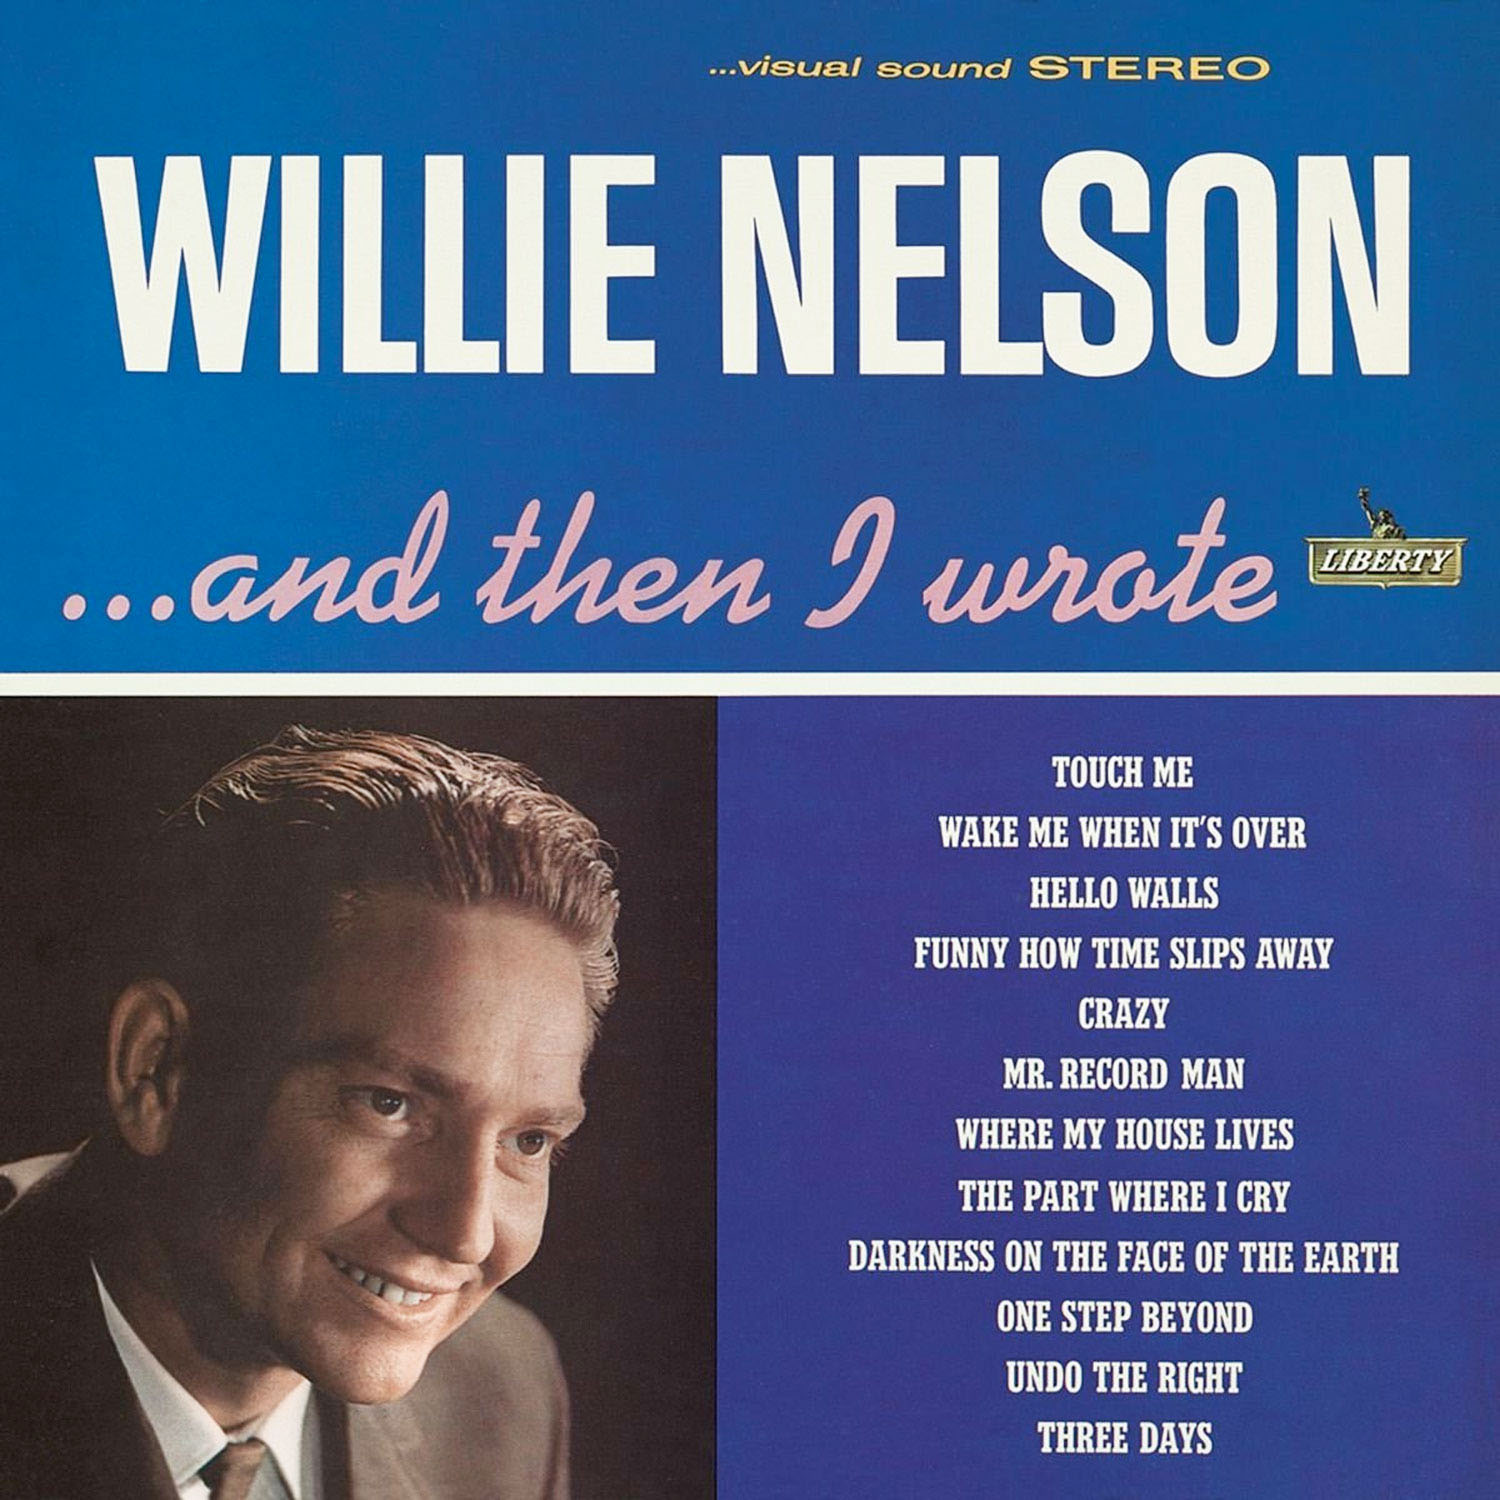 AAPP 133 45 Willie Nelson Wrote